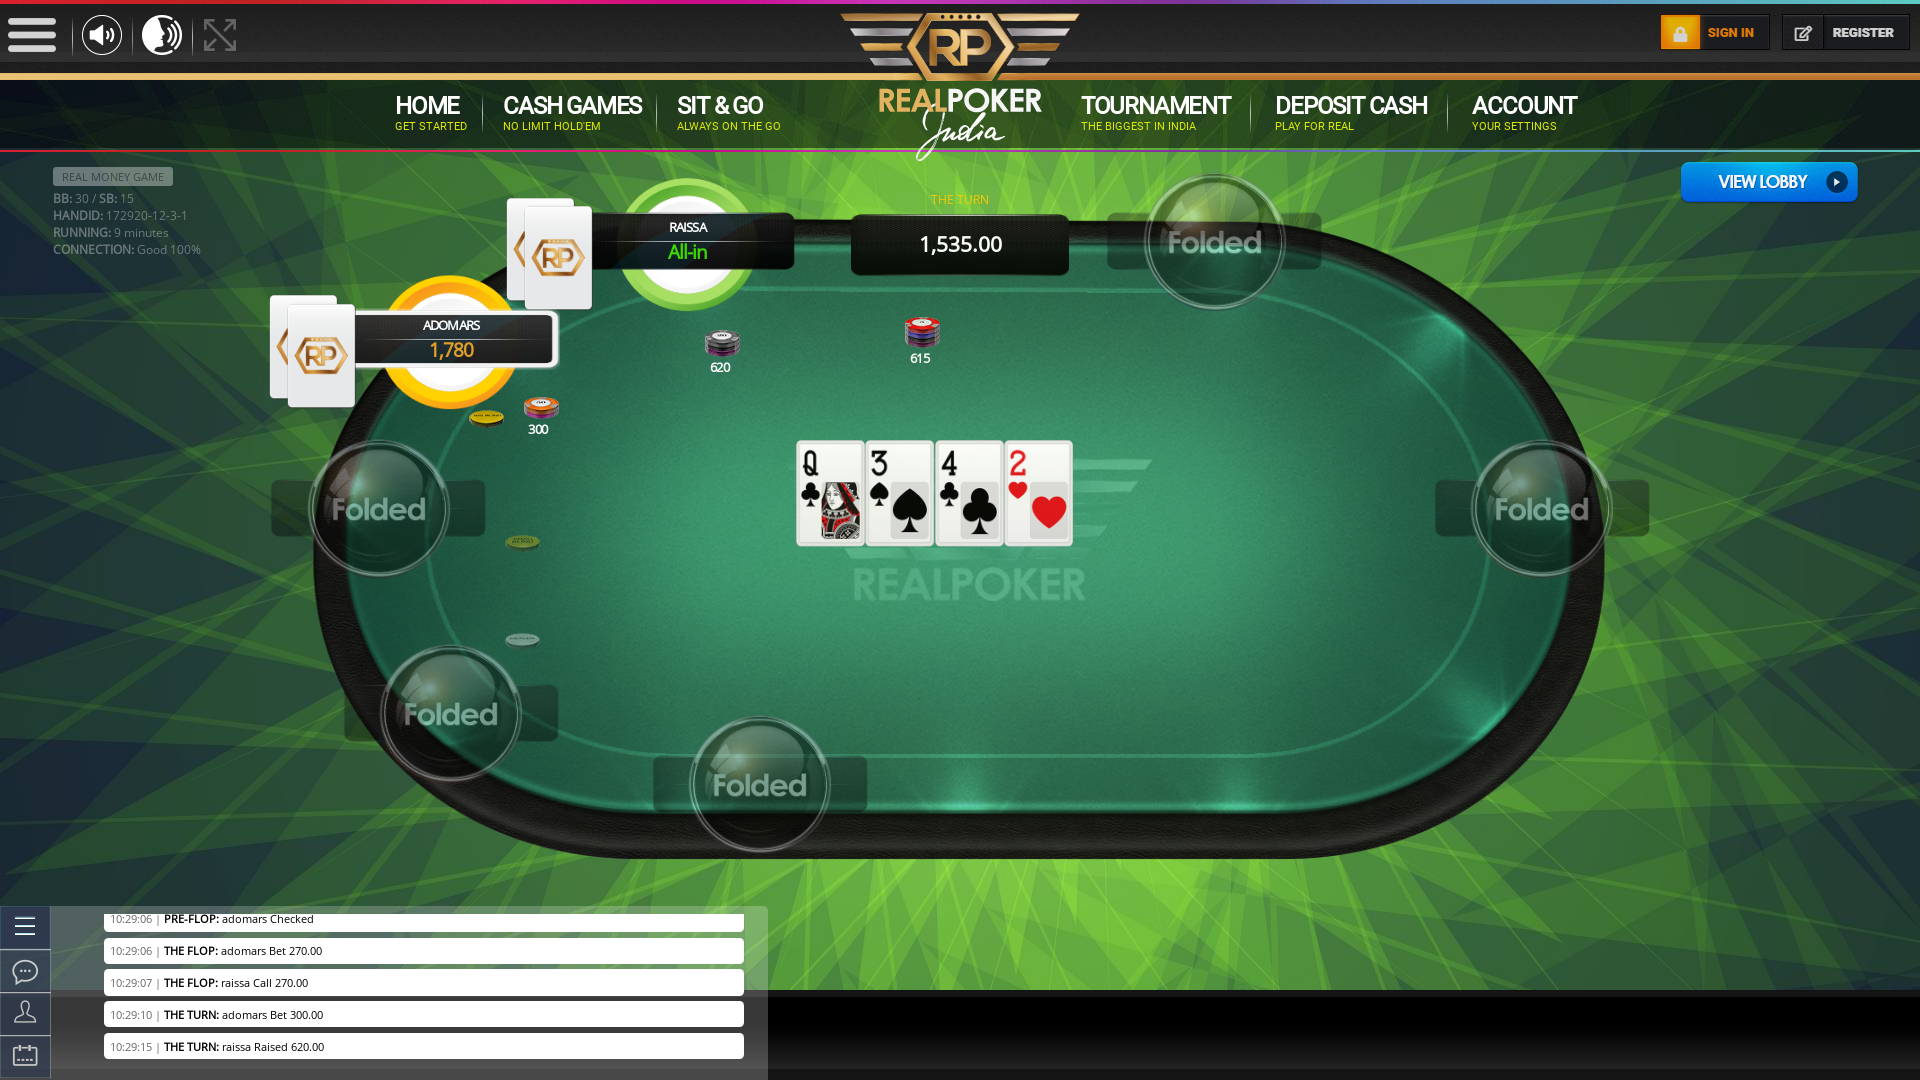 Real poker 10 player table in the 9th minute of the match